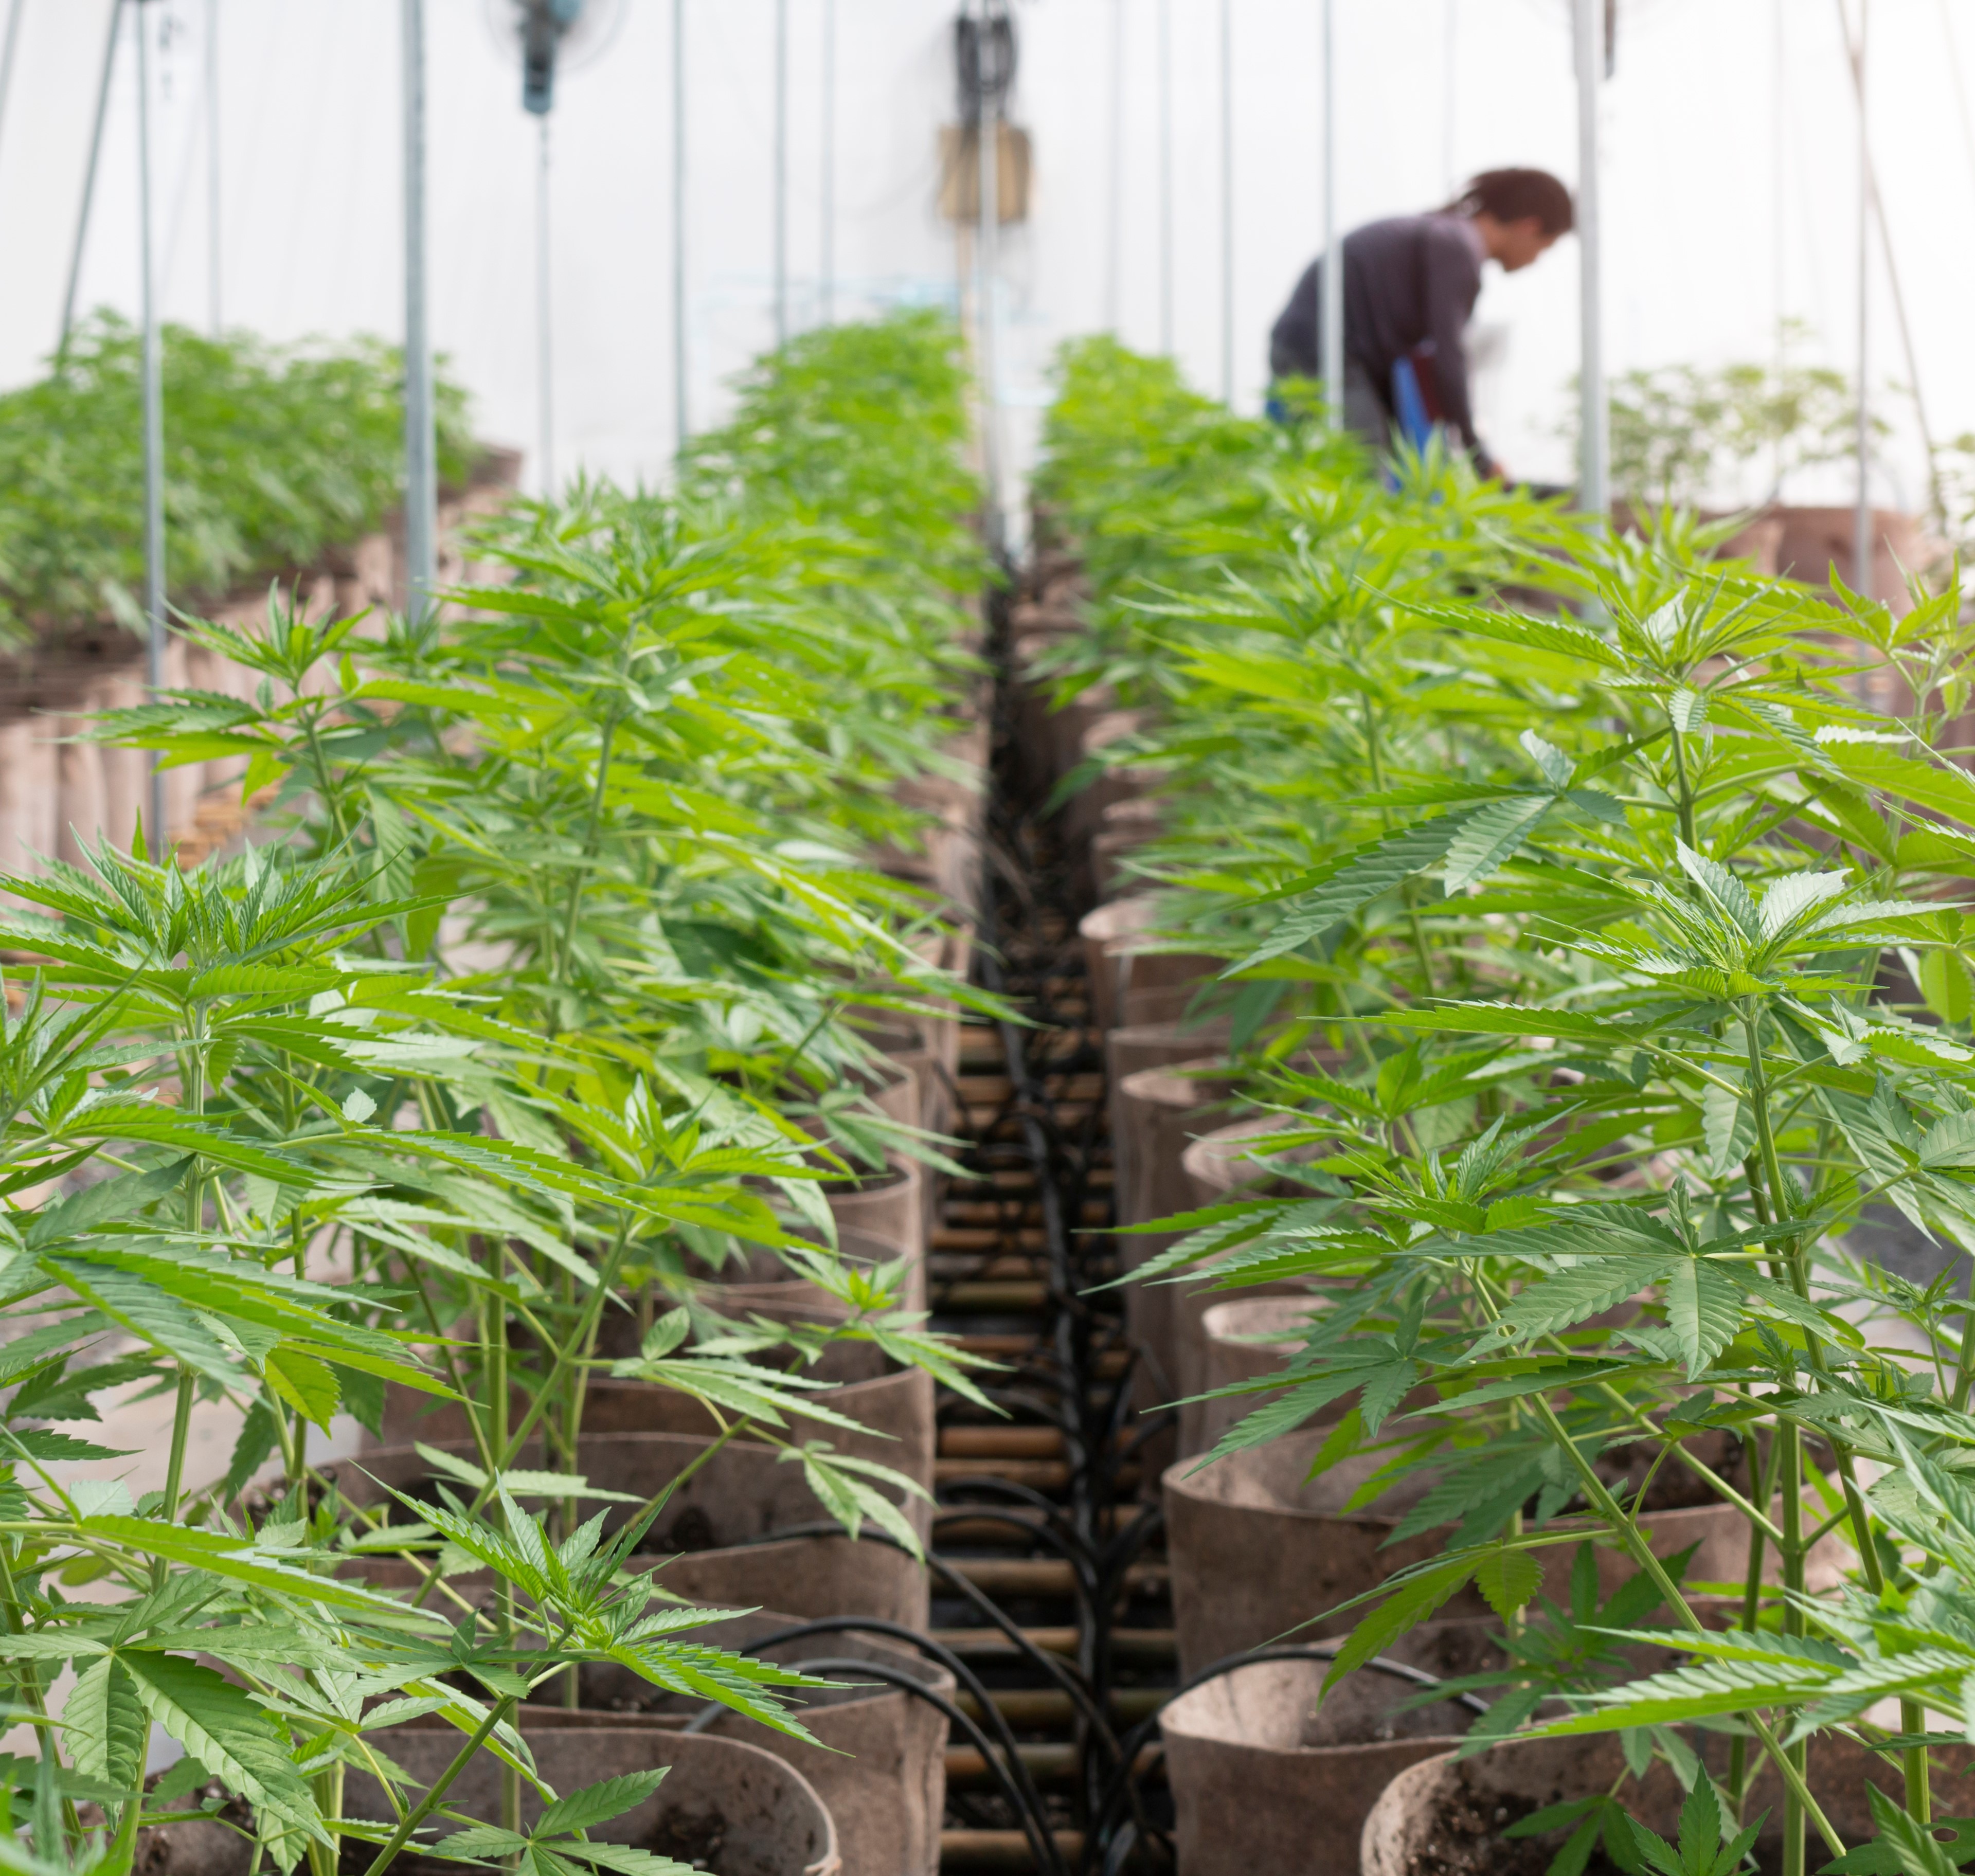 Cannabis plants in a growing facility